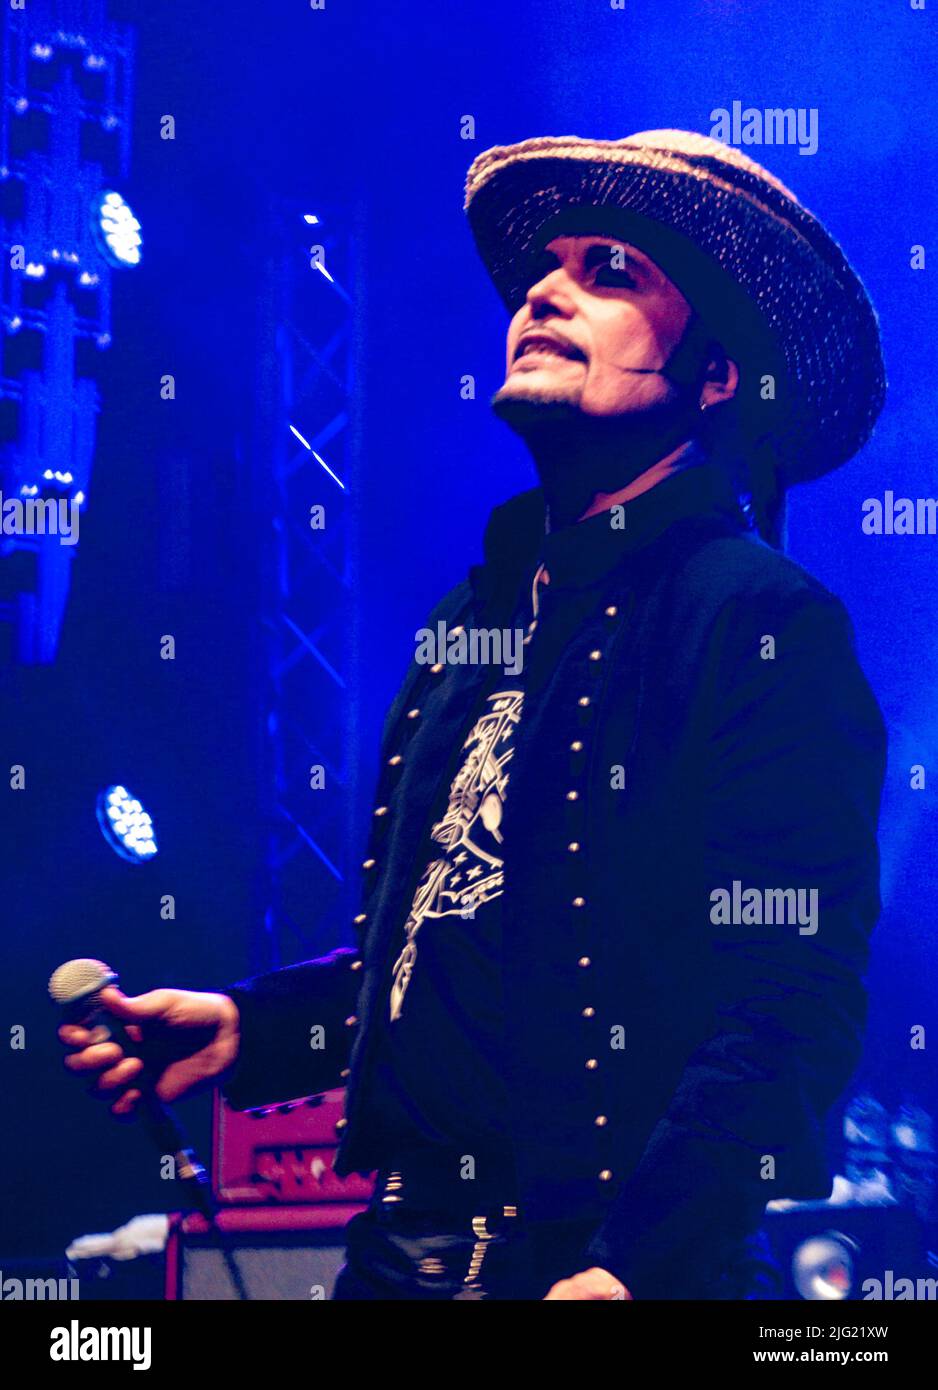 Adam and the Ants, Antics Tour in Liverpool, Juli 4. 2022. Adam Ant, die Post-Punk-Musikikone von 80s, spielte viele seiner größten Hits, darunter Prince Charming, Stand and Deliver, Physical, Goody Two Shoes, Kings of the Wild Frontier, Vive Le Rock, Ant Music und Plastic Surgery (aus dem Derek Jarman-Film Jubilee). Stockfoto